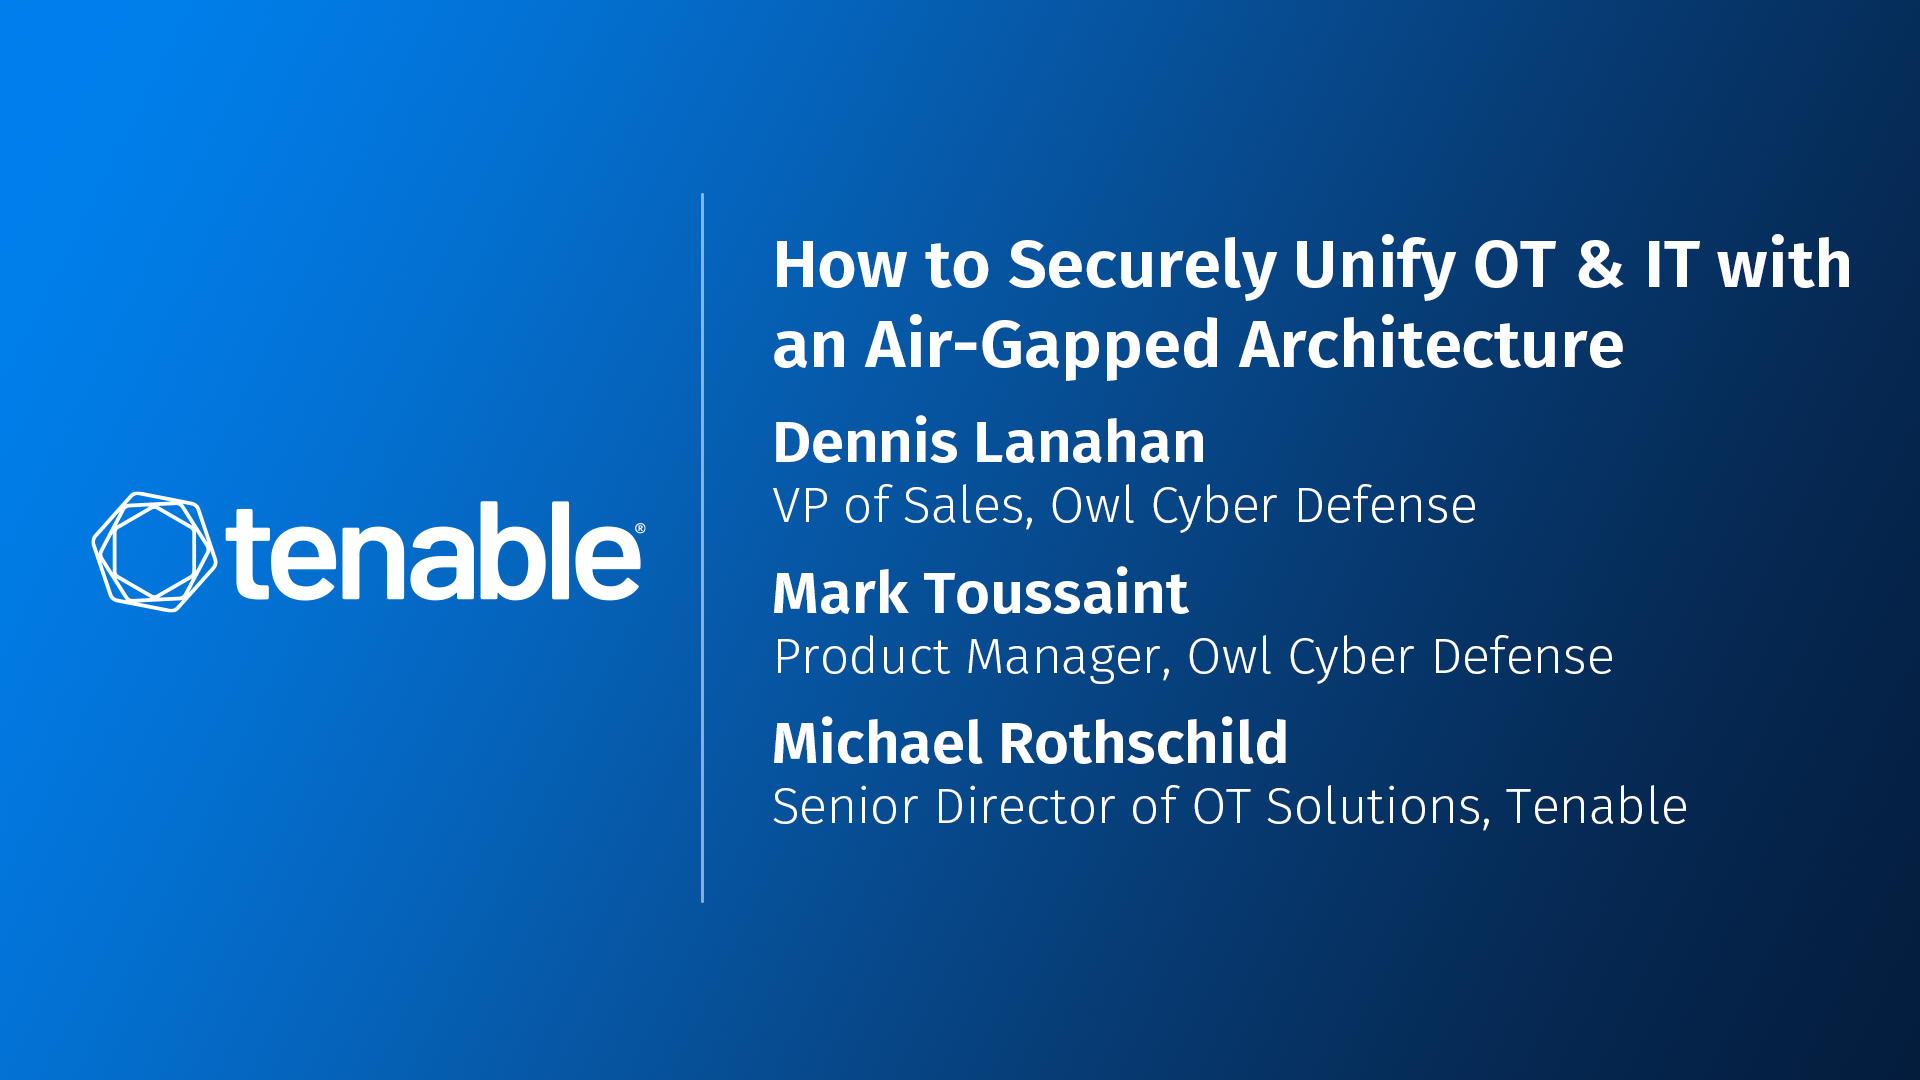 How to Securely Unify OT & IT with an Air-Gapped Architecture